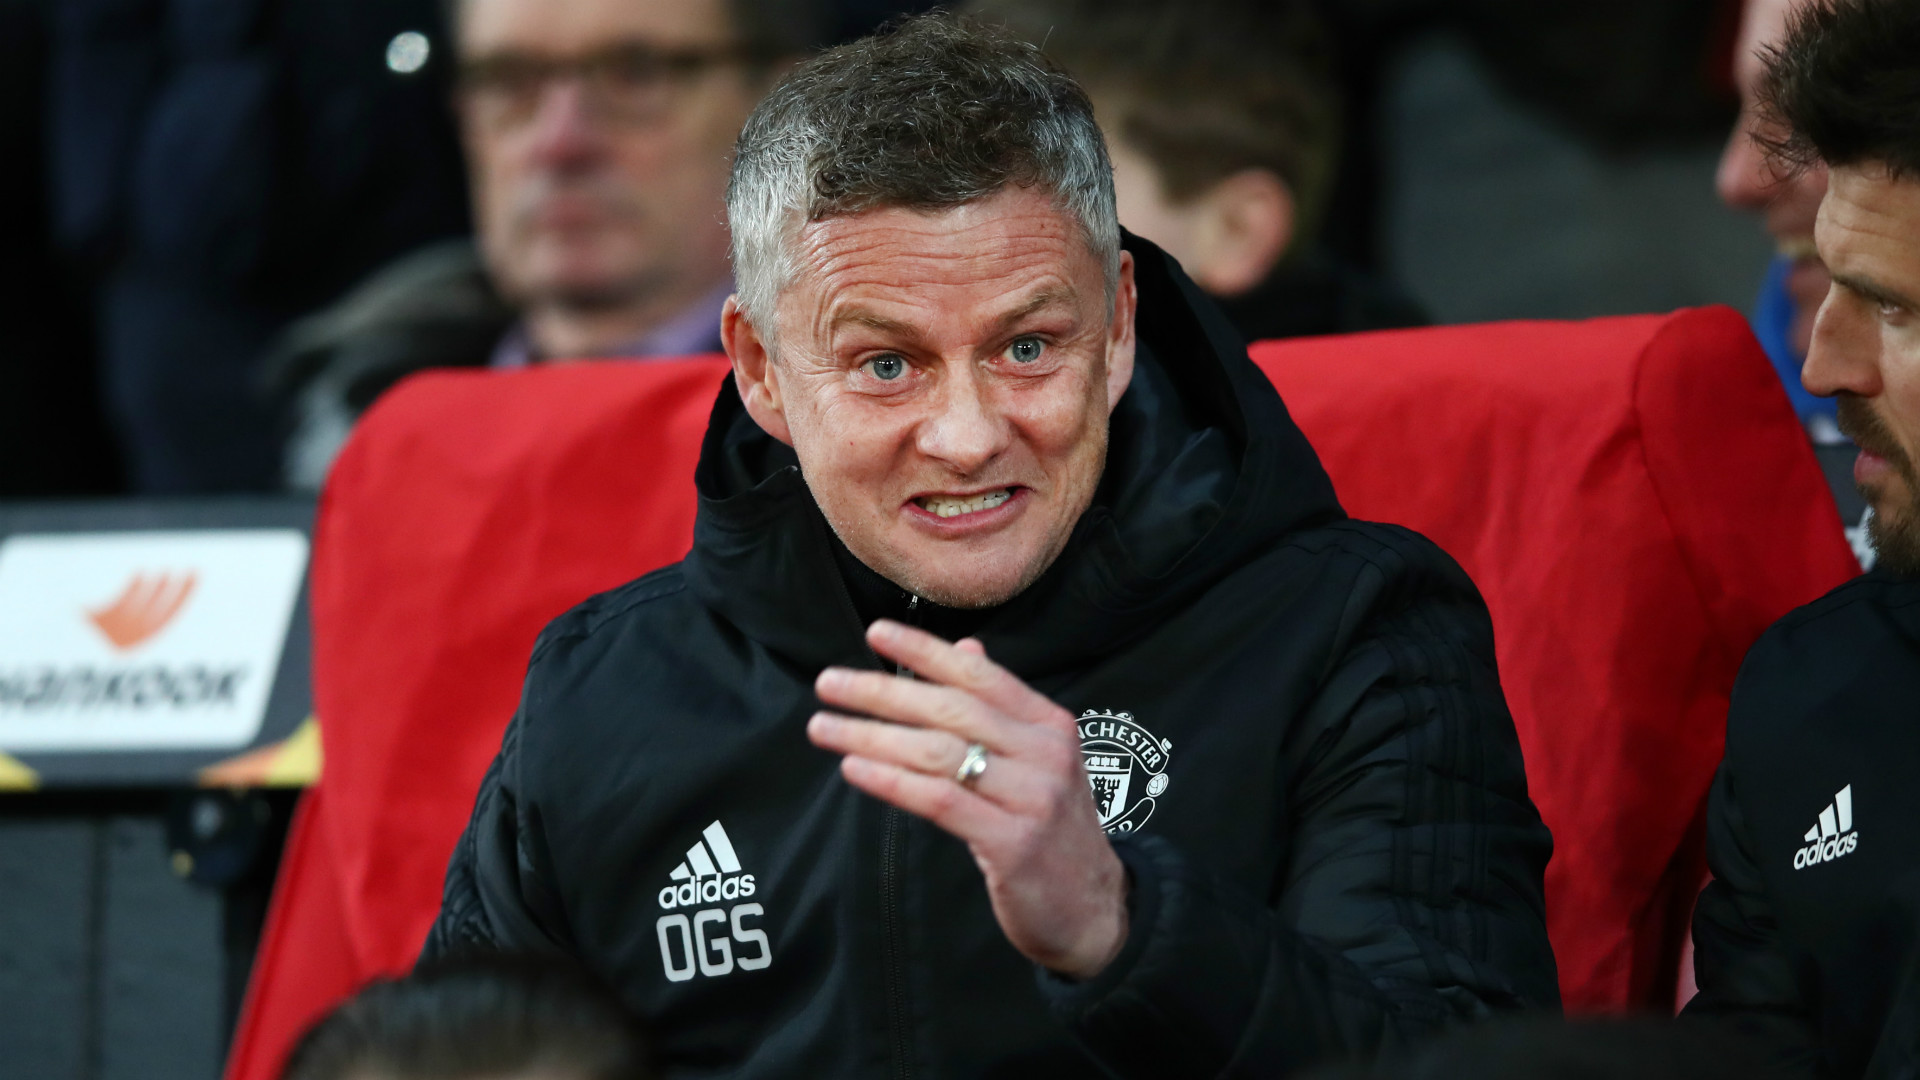 Solskjaer: 'The players are smiling' after Man Utd romp in Europa League